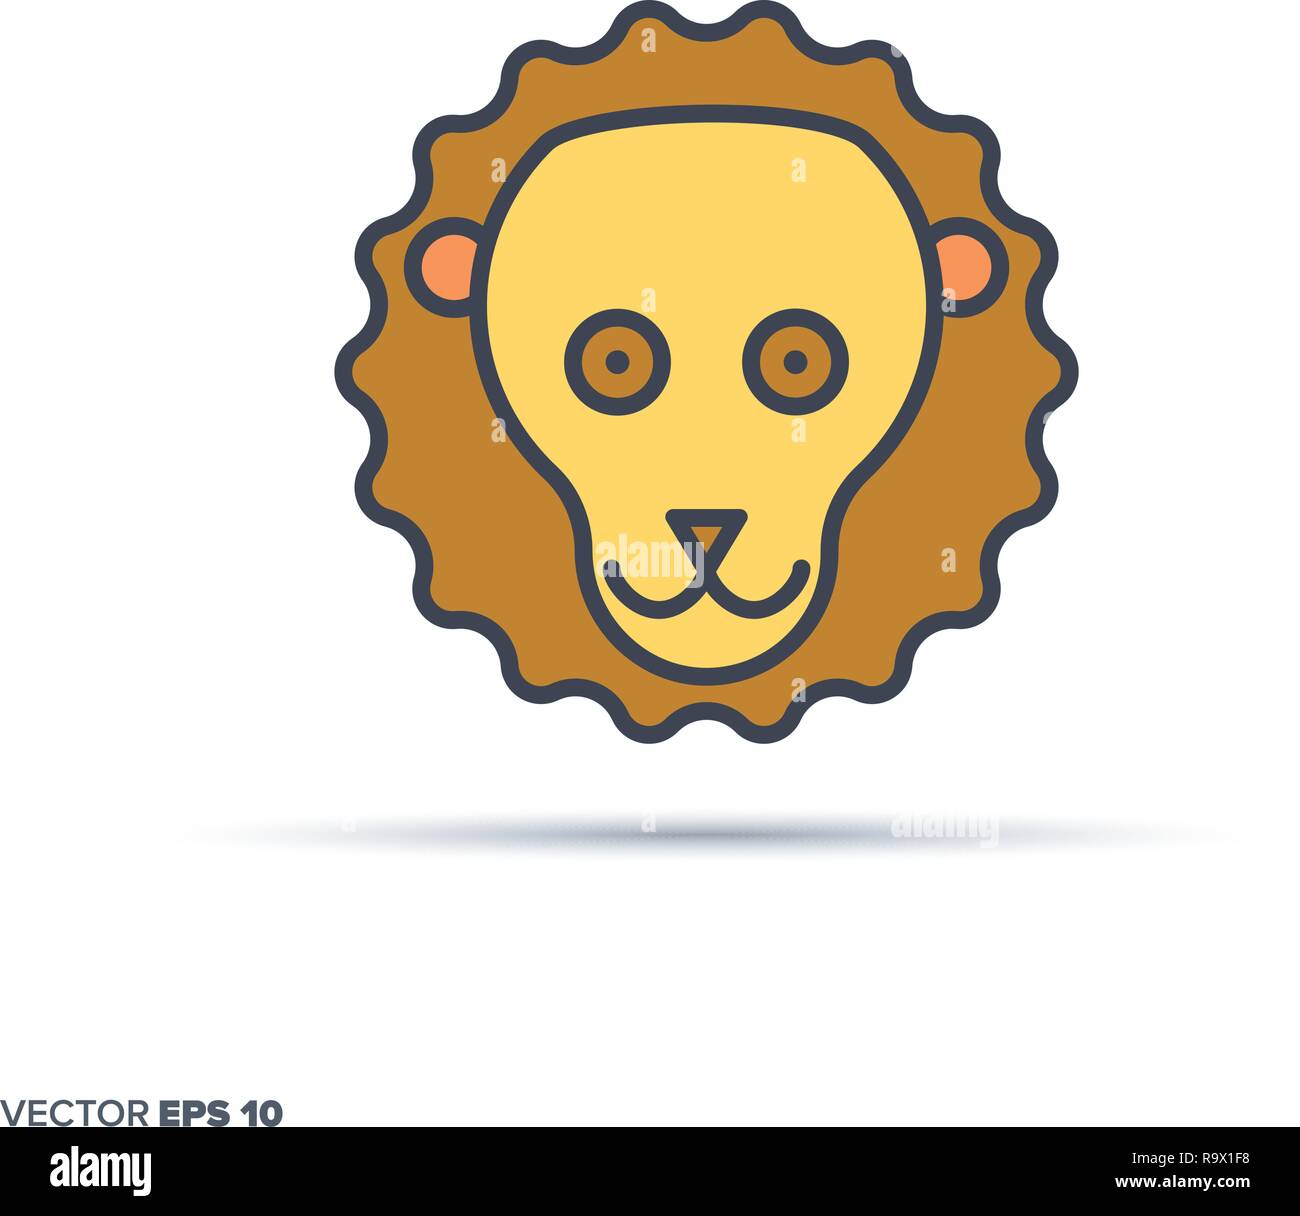 Cute lion face outline vector icon with color fill. Funny animal illustration. Stock Vector